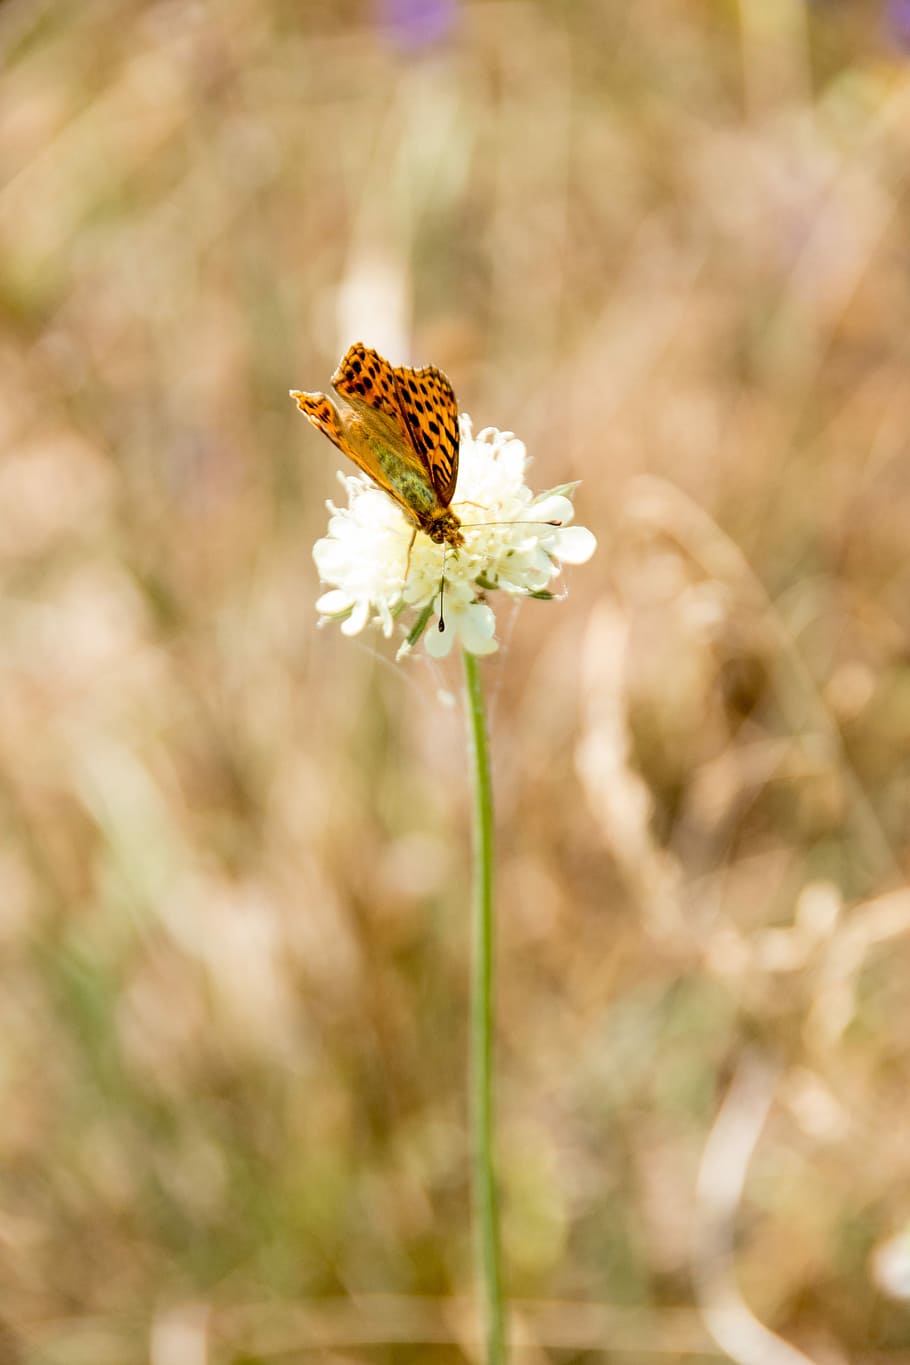 Butterfly, Nature, Insect, Animal, summer, close, wing, meadow, flower, animal world